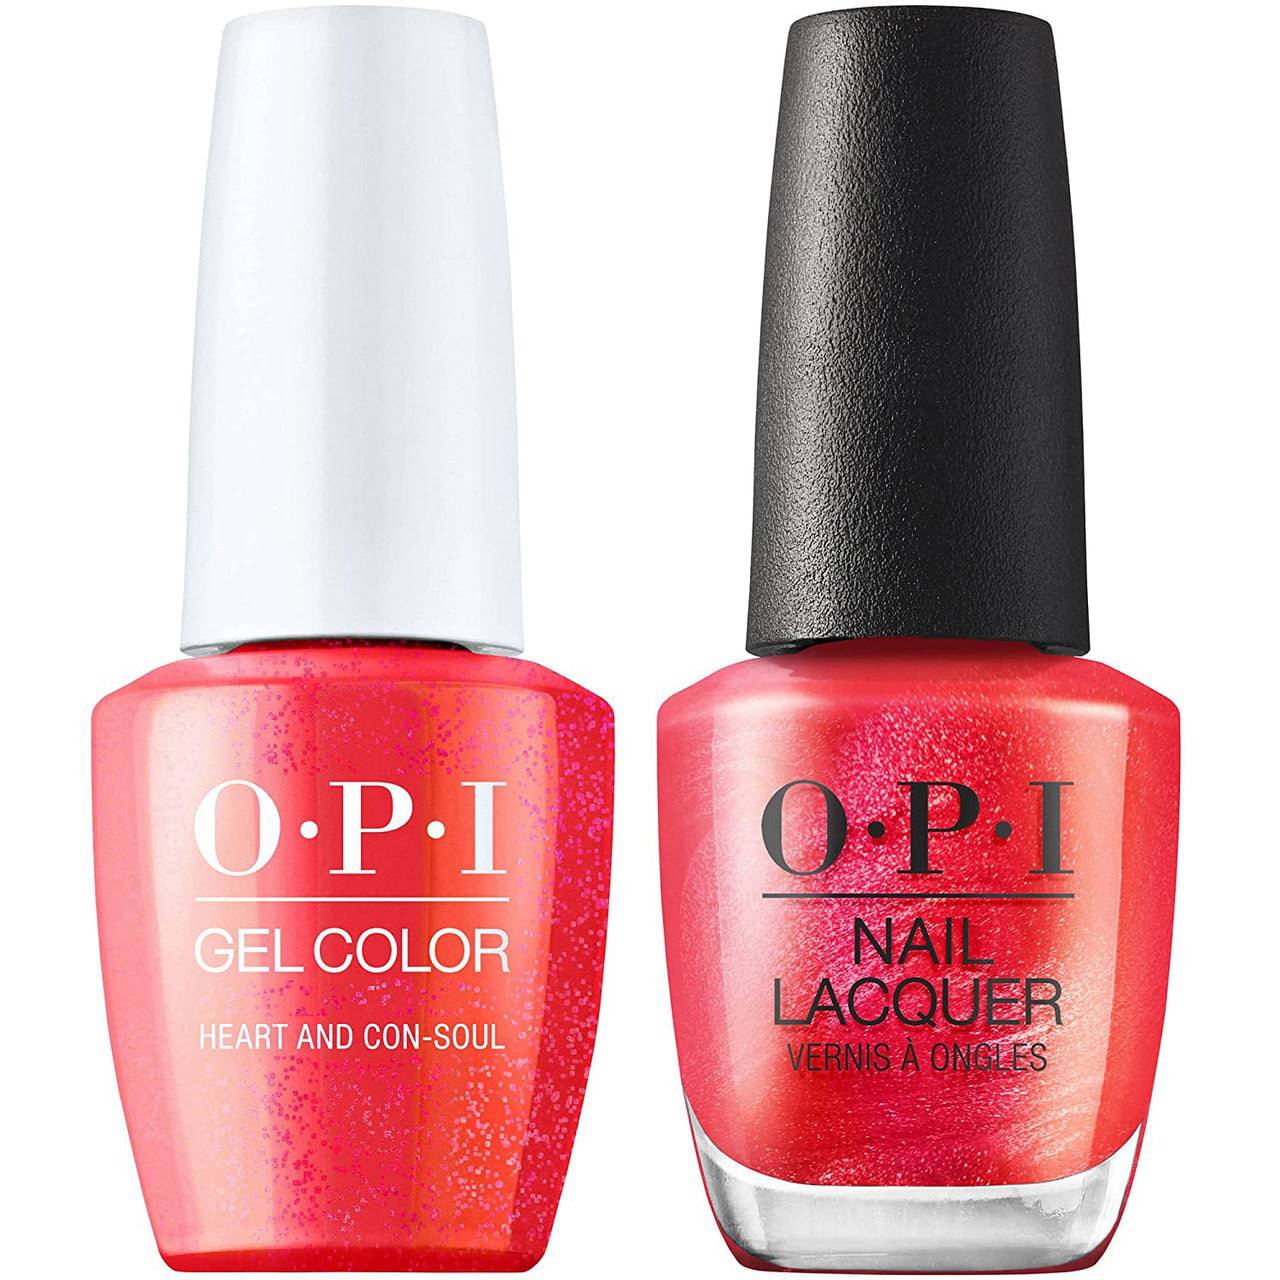 OPI GelColor + Matching Lacquer Heart and Con-soul #D55 - Universal Nail Supplies